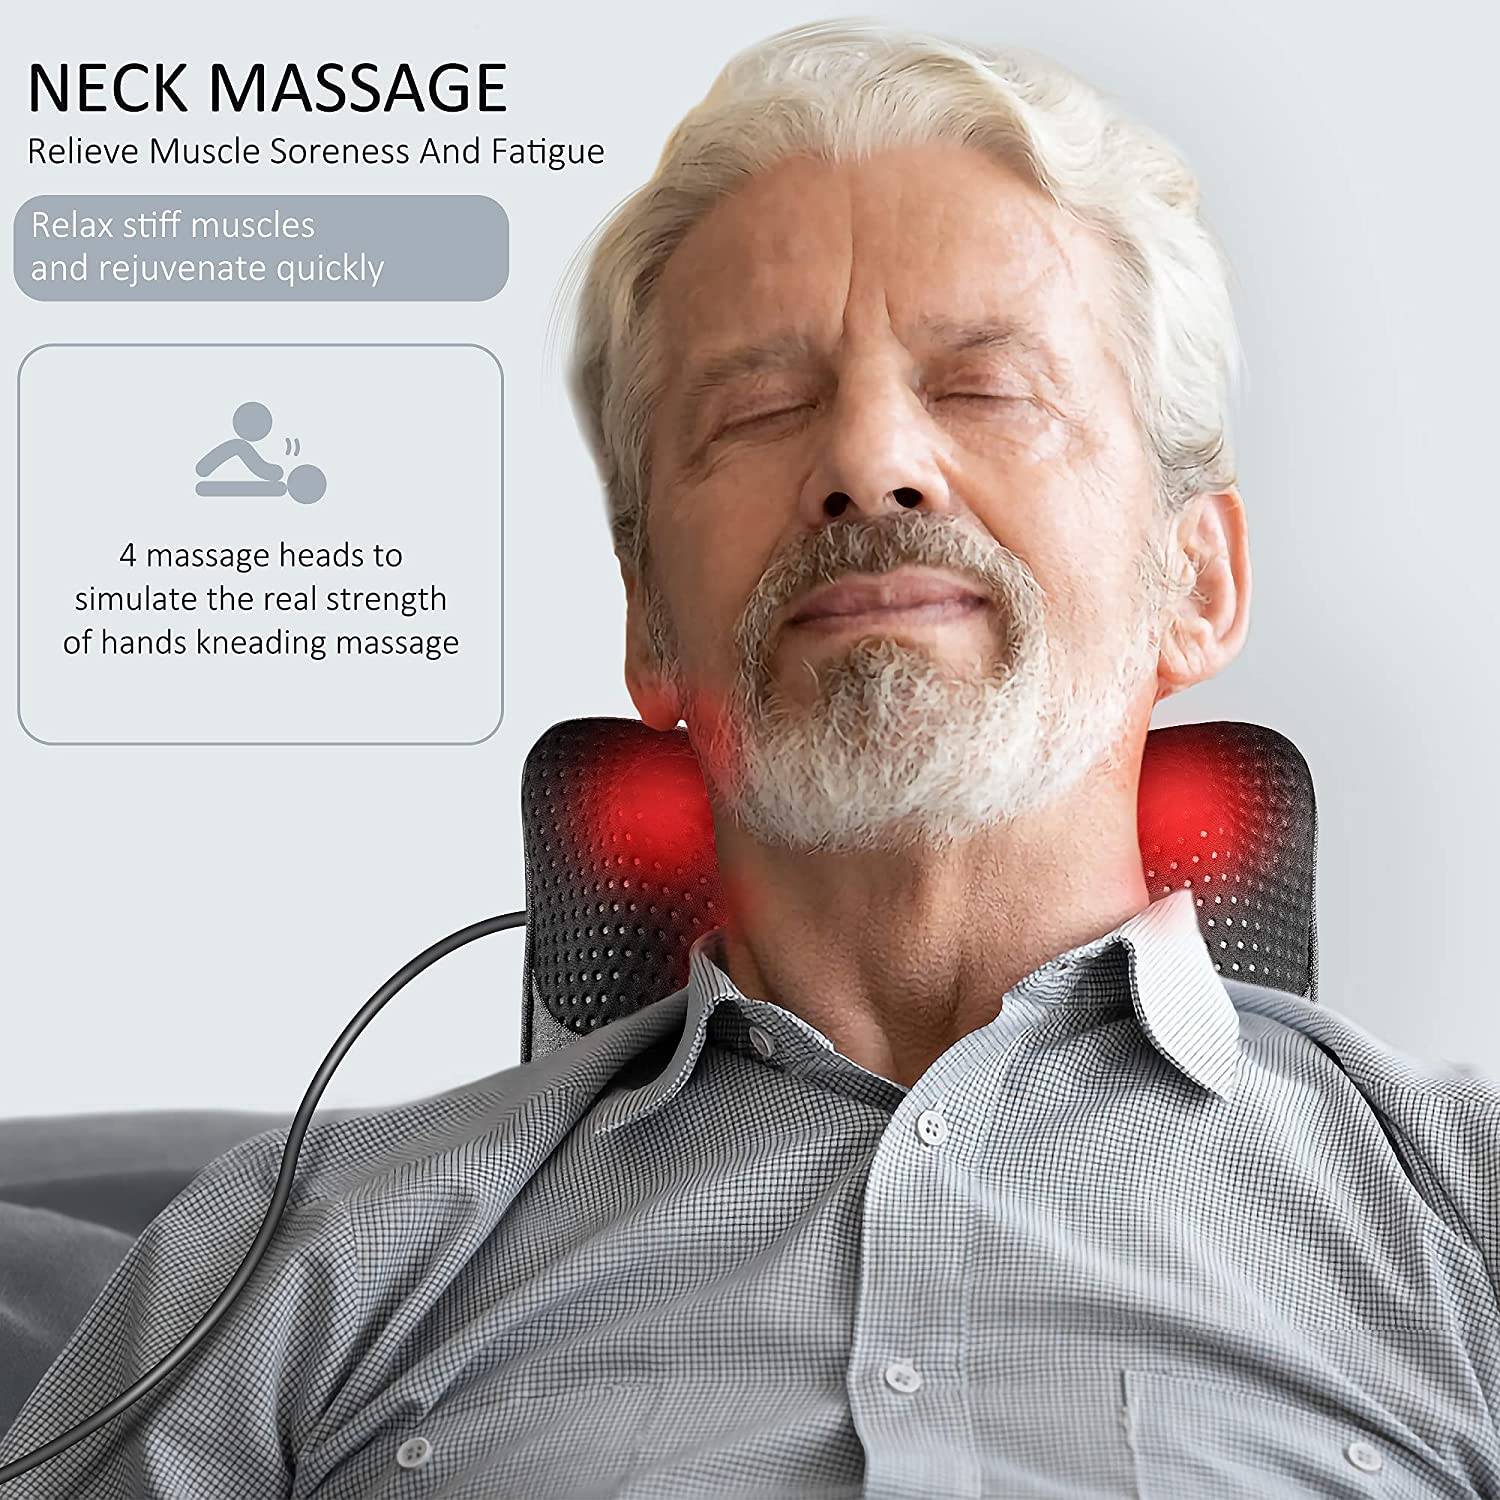 Don't live with neck pain anymore! Get instant relief with the Neck Massager with Heat.